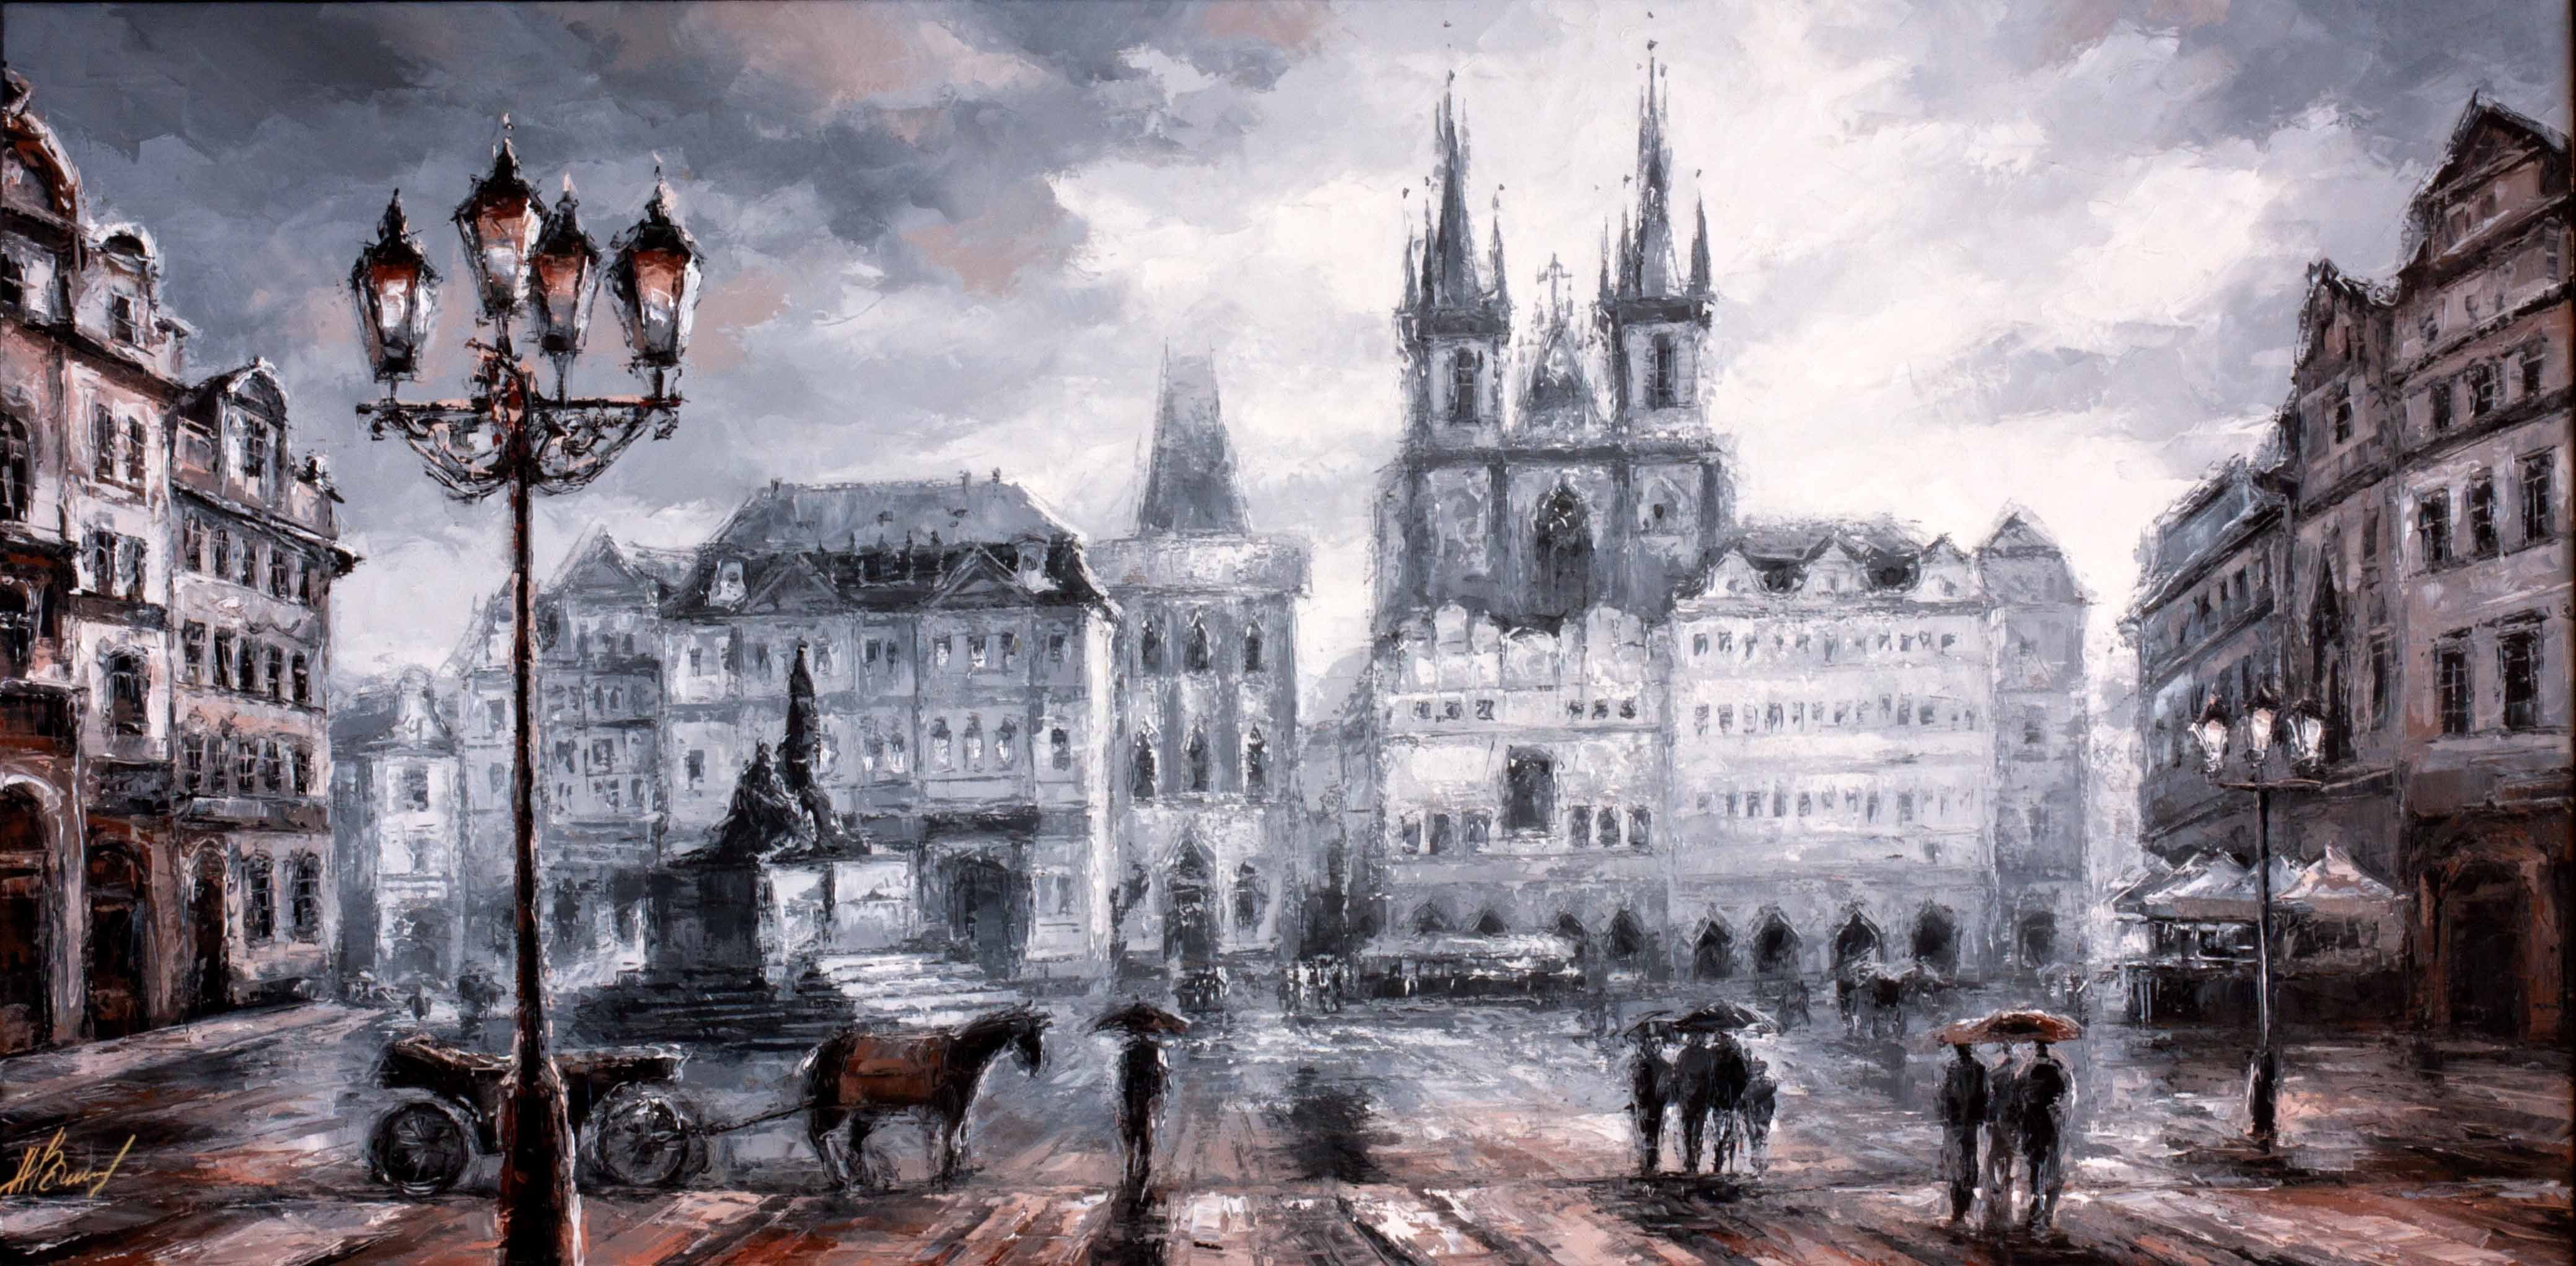 Oil painting. "Old town square" Architecture - Picture - art - Horse - Street light - Paint - Morning - City - Facade - art - Spire - Medieval architecture - Urban landscape - History - Tourism - Church - Scenery - Tourist attraction - Town Squar